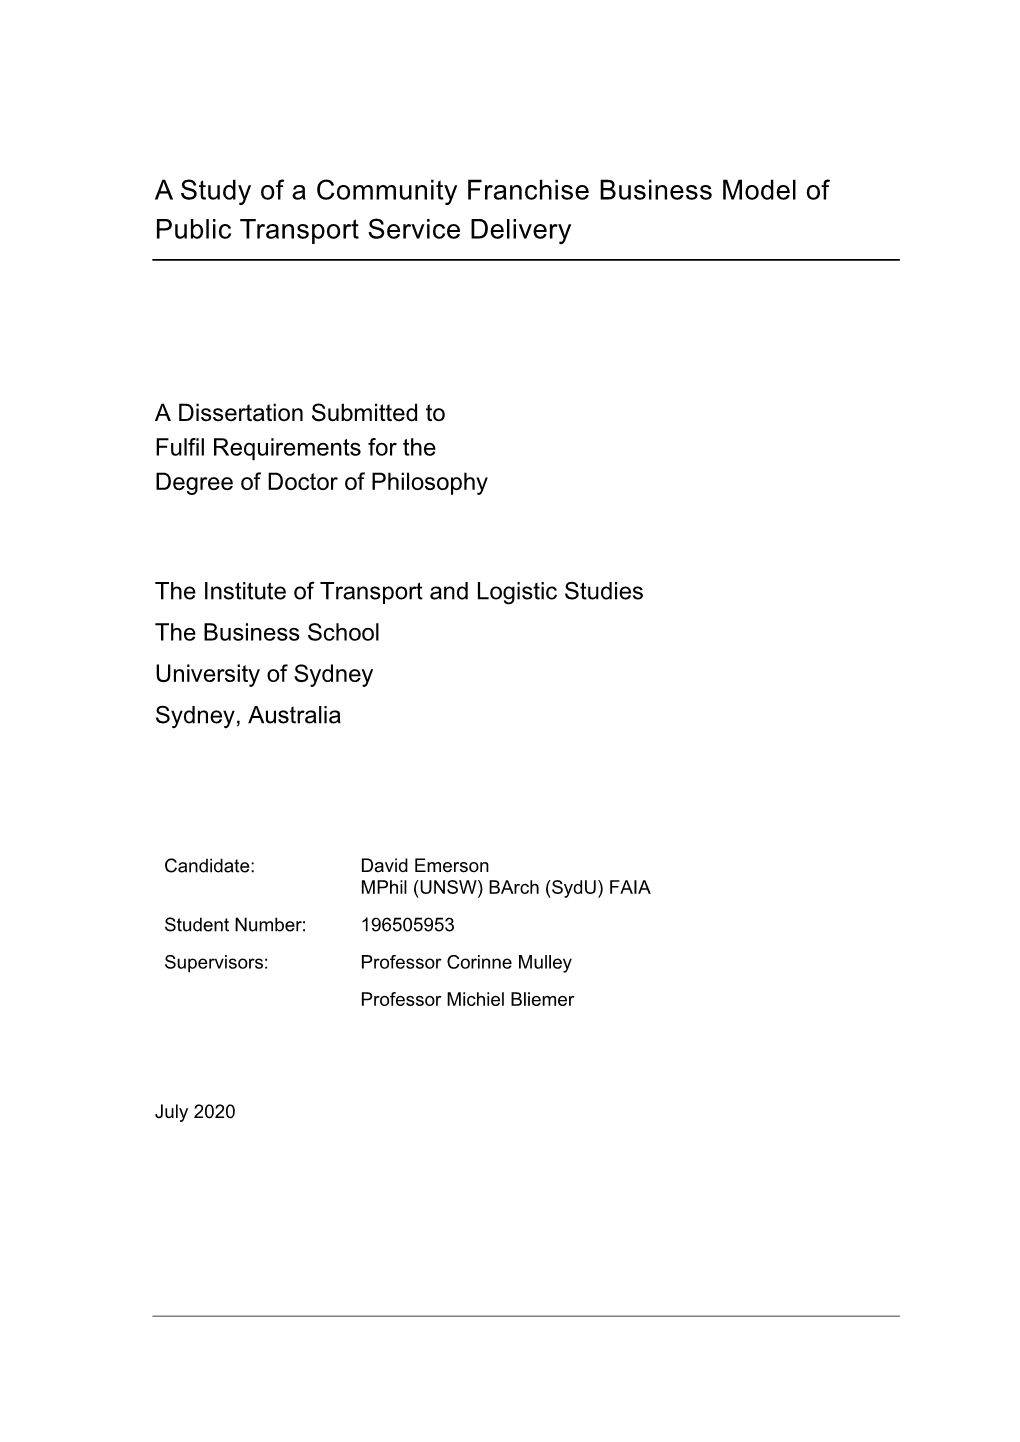 A Study of a Community Franchise Business Model of Public Transport Service Delivery